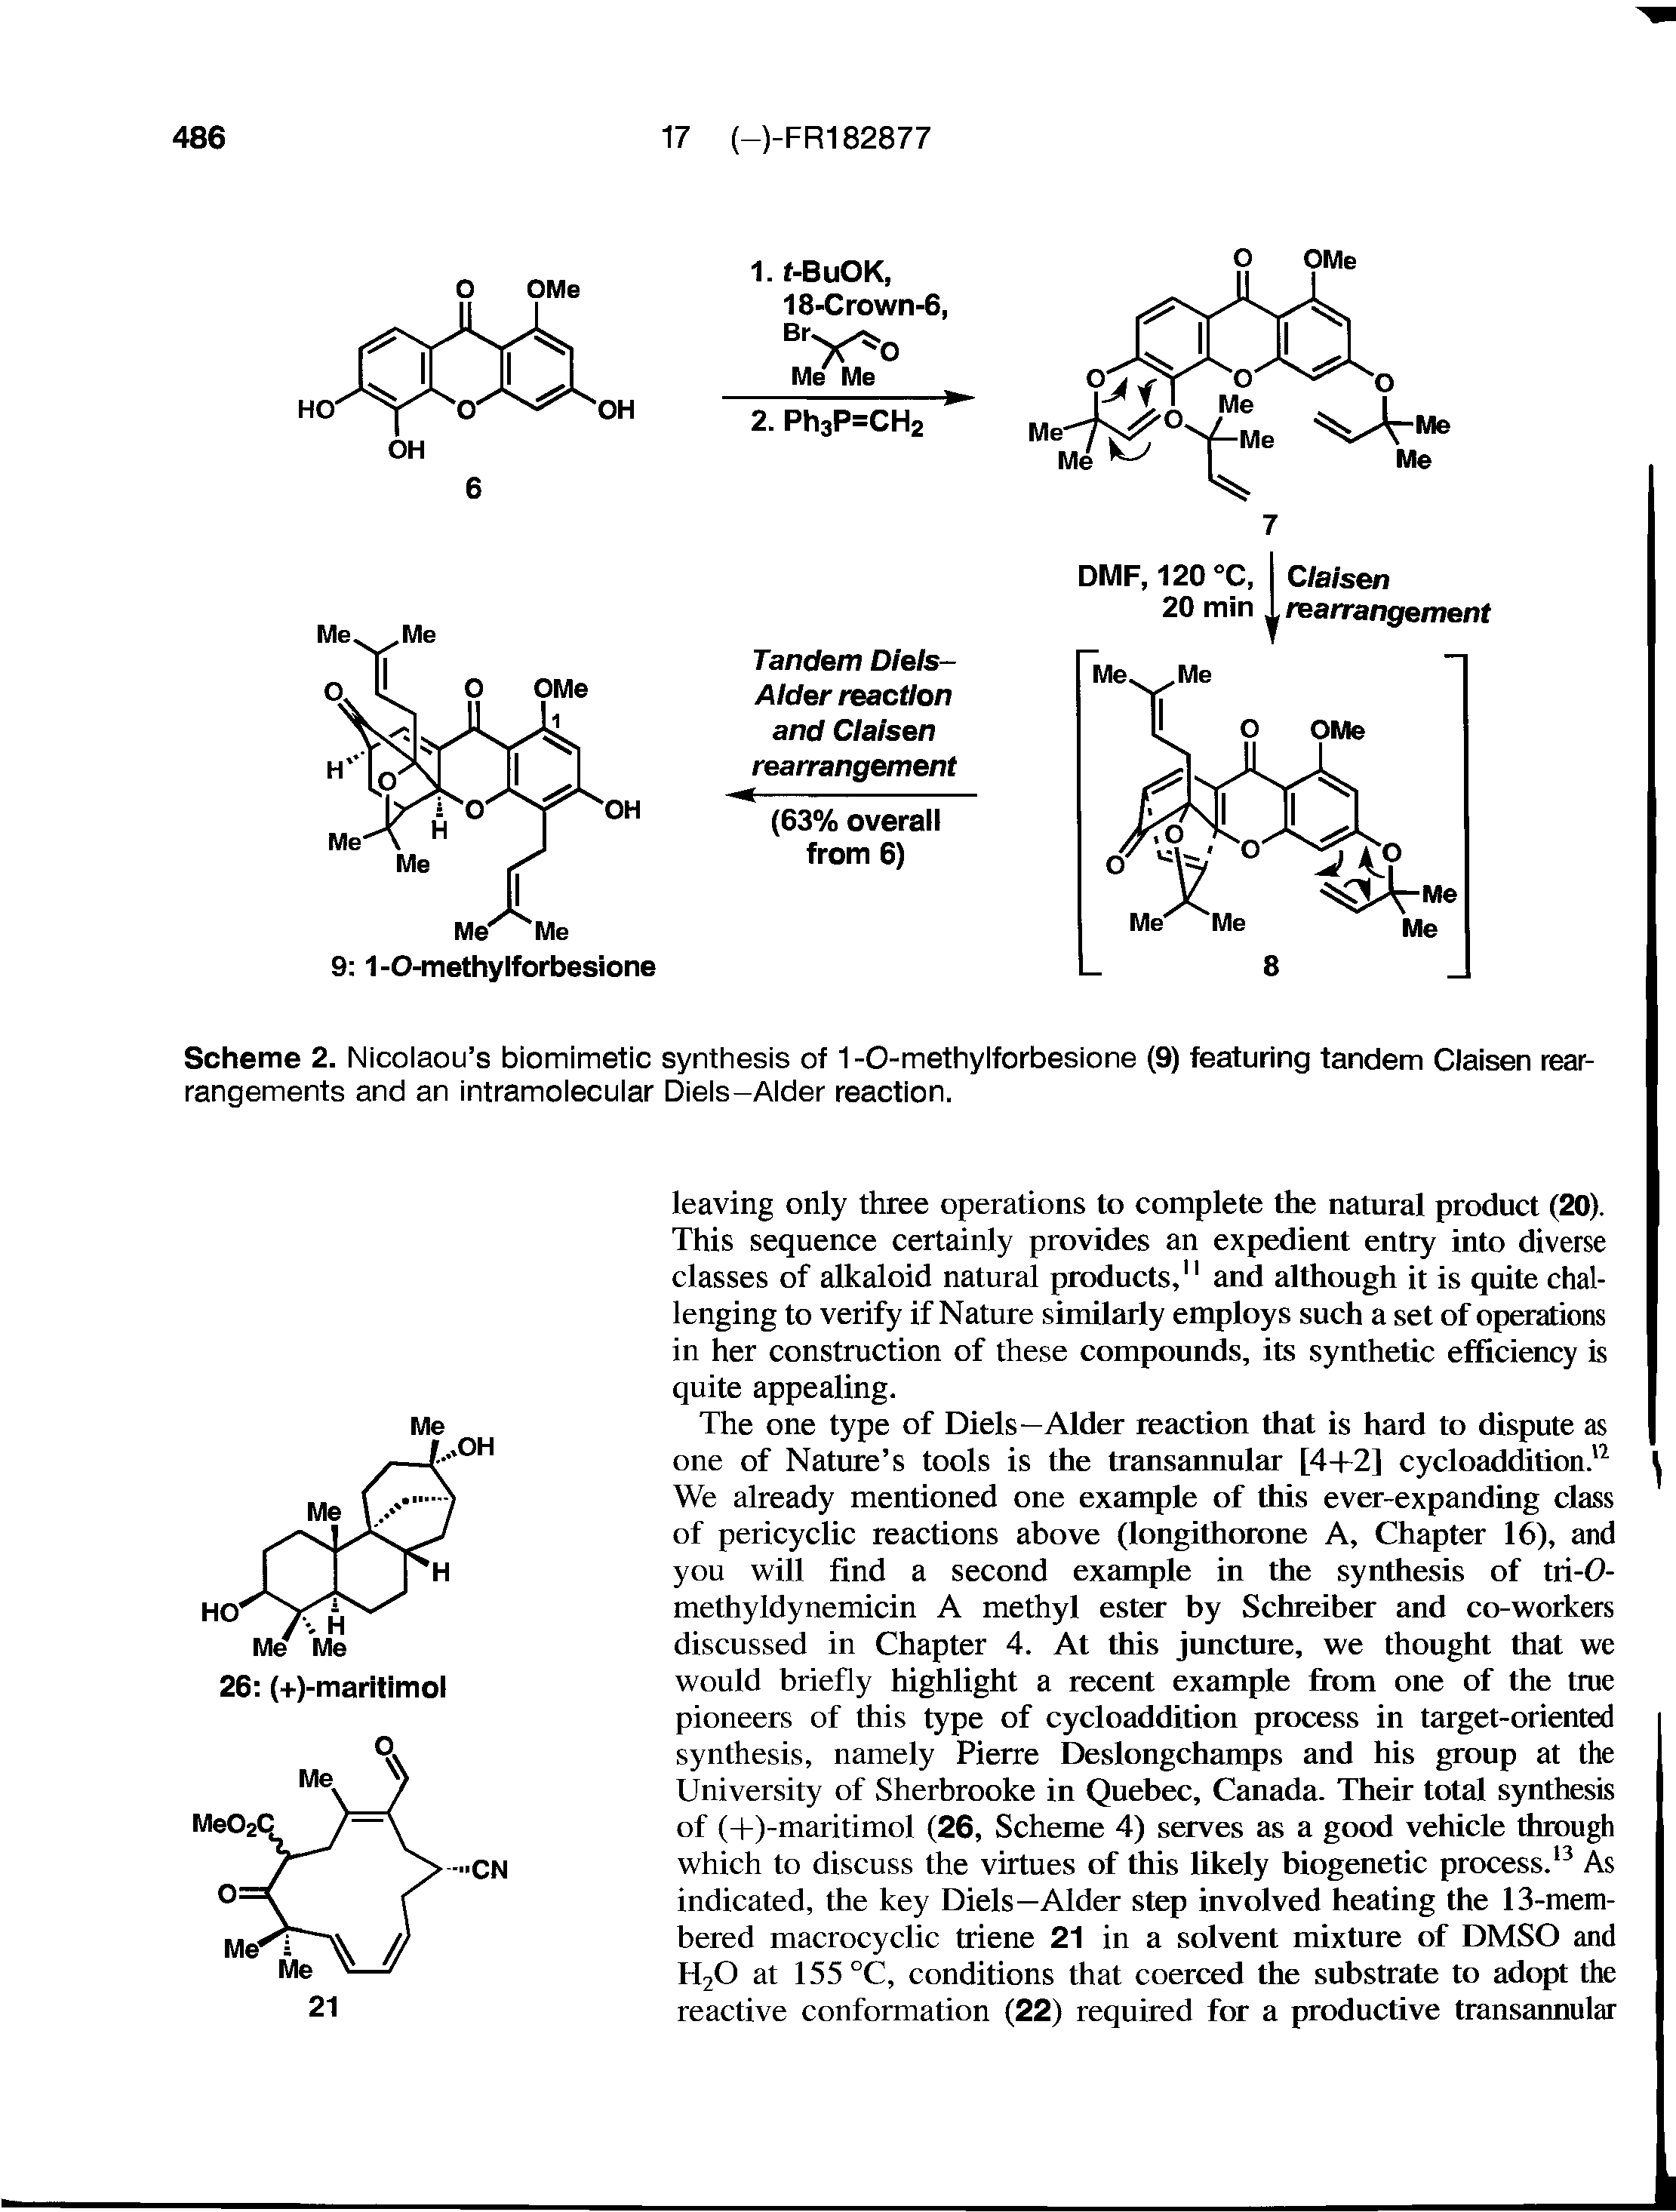 Scheme 2. Nicolaou s biomimetic synthesis of 1-0-methylforbesione (9) featuring tandem Claisen rearrangements and an intramolecular Diels-Alder reaction.